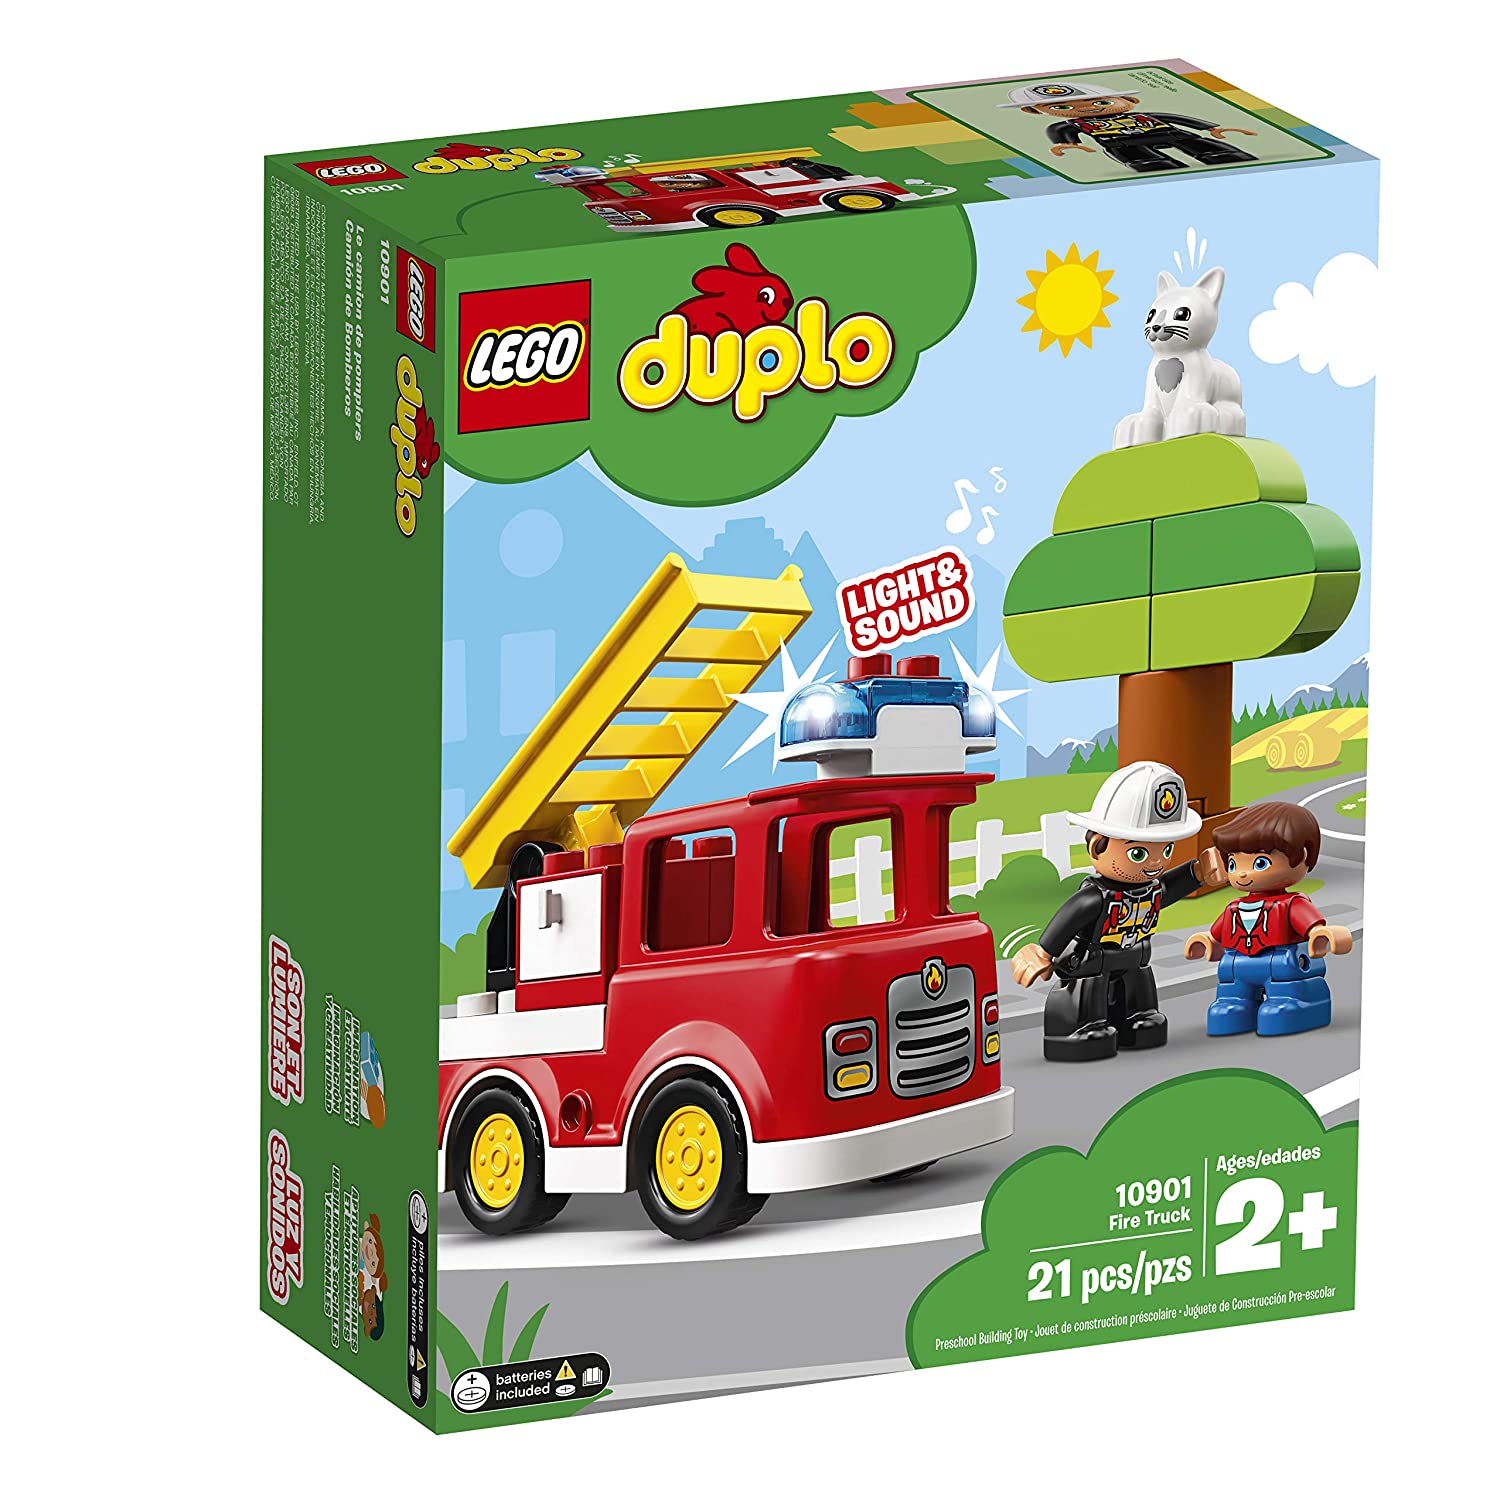 Top 9 Best LEGO Fire Truck Sets Reviews in 2022 8